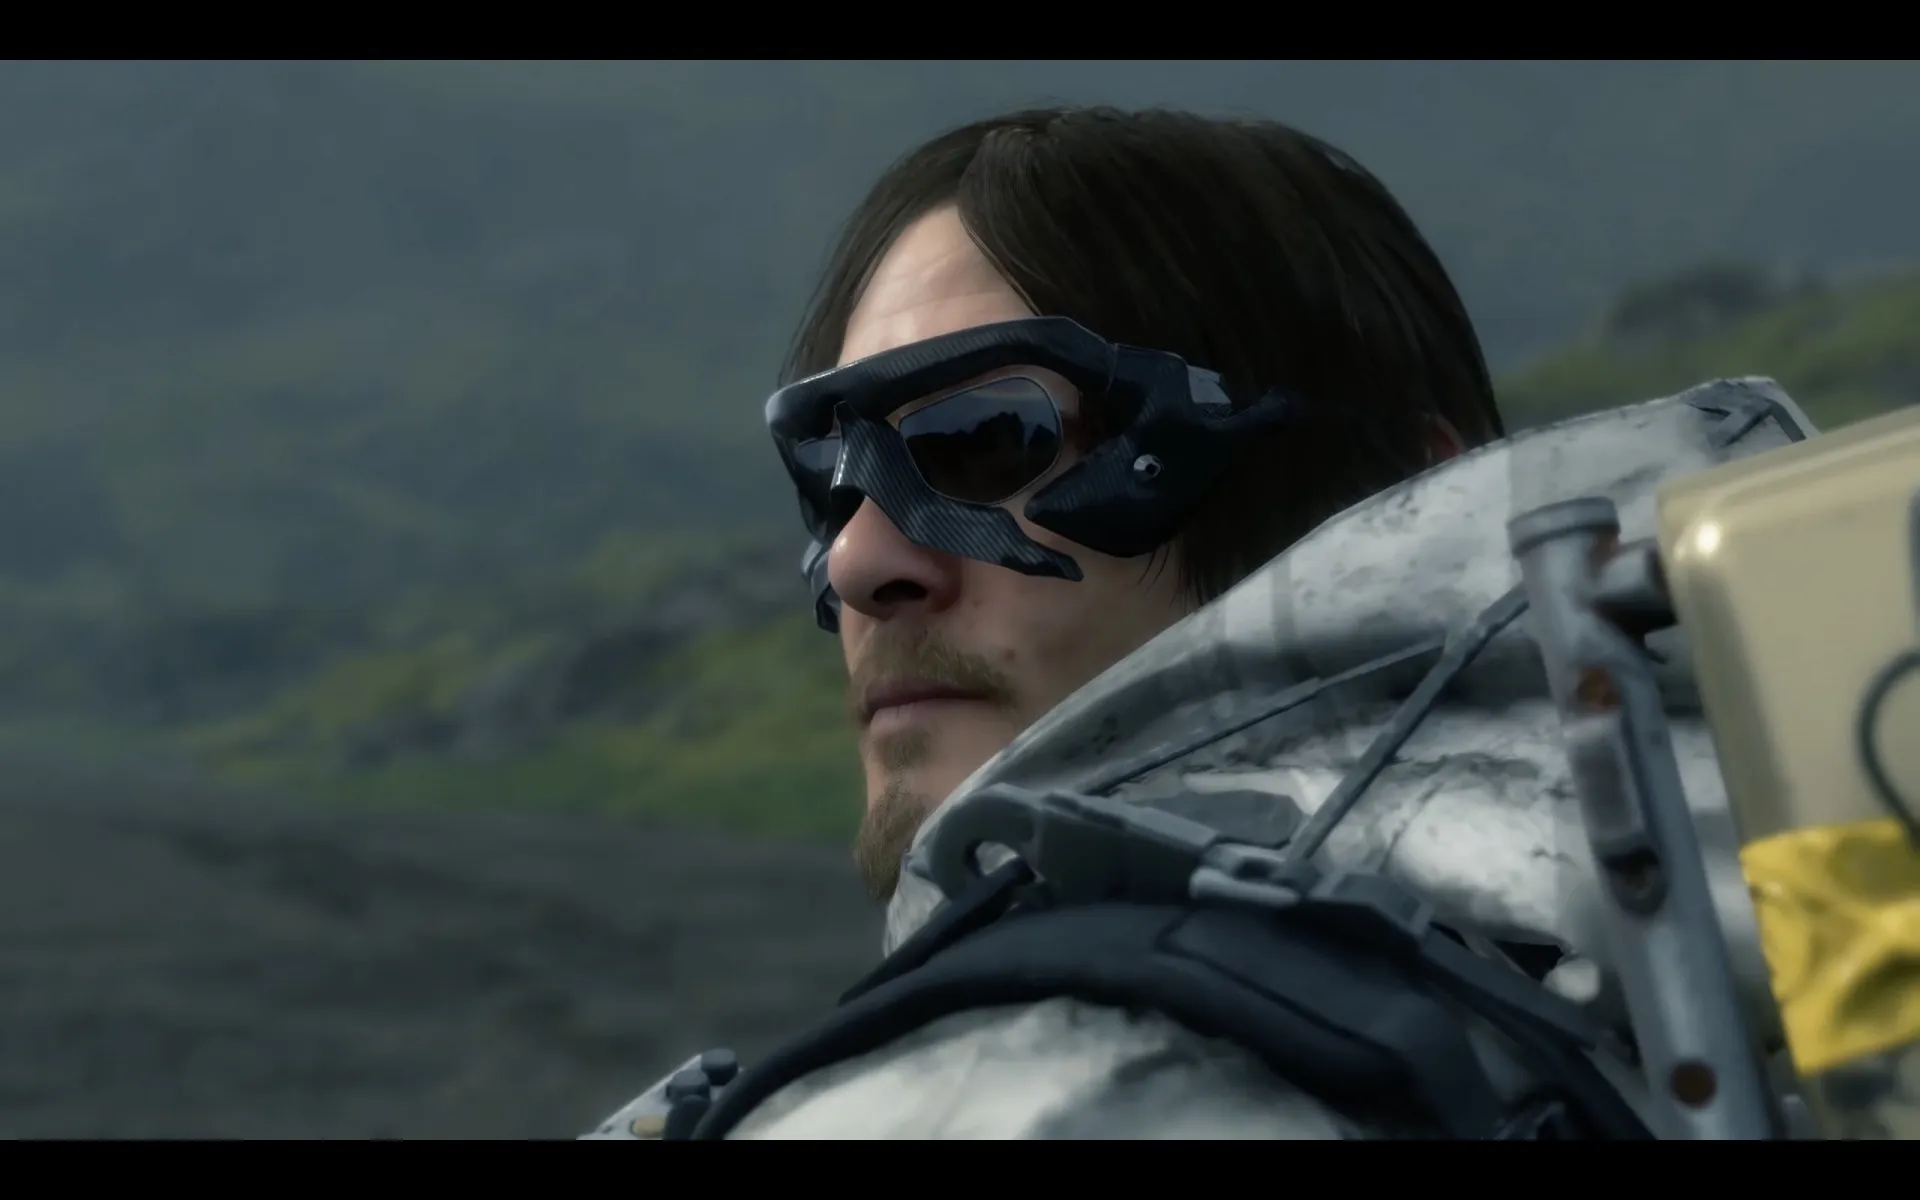 Will there be a Death Stranding PS5 upgrade to the Director's Cut for those  that own the original? - GameRevolution